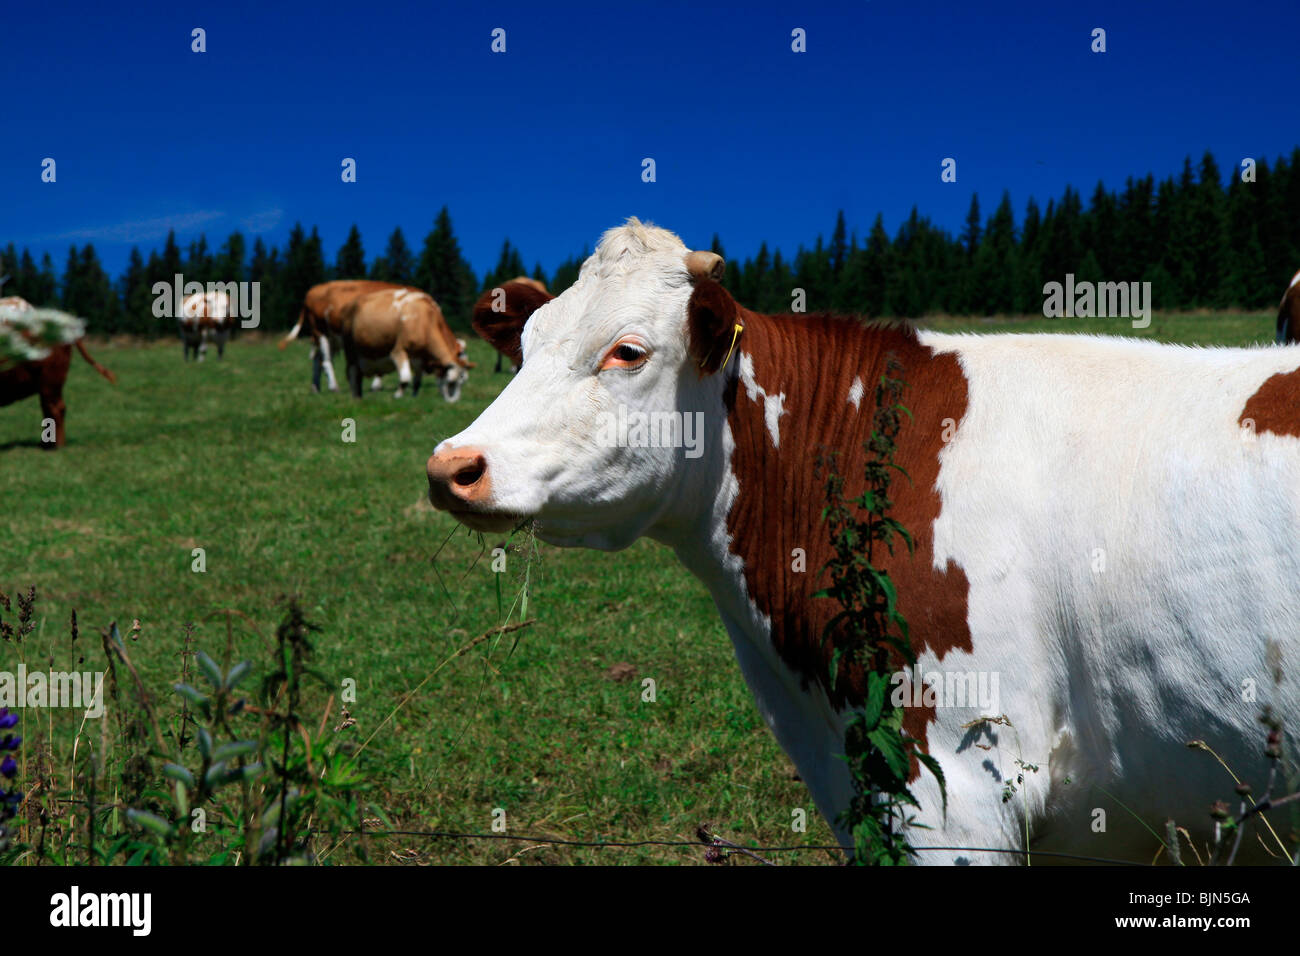 Czech Republic - Bohemian Forest - cattle out at grass Stock Photo